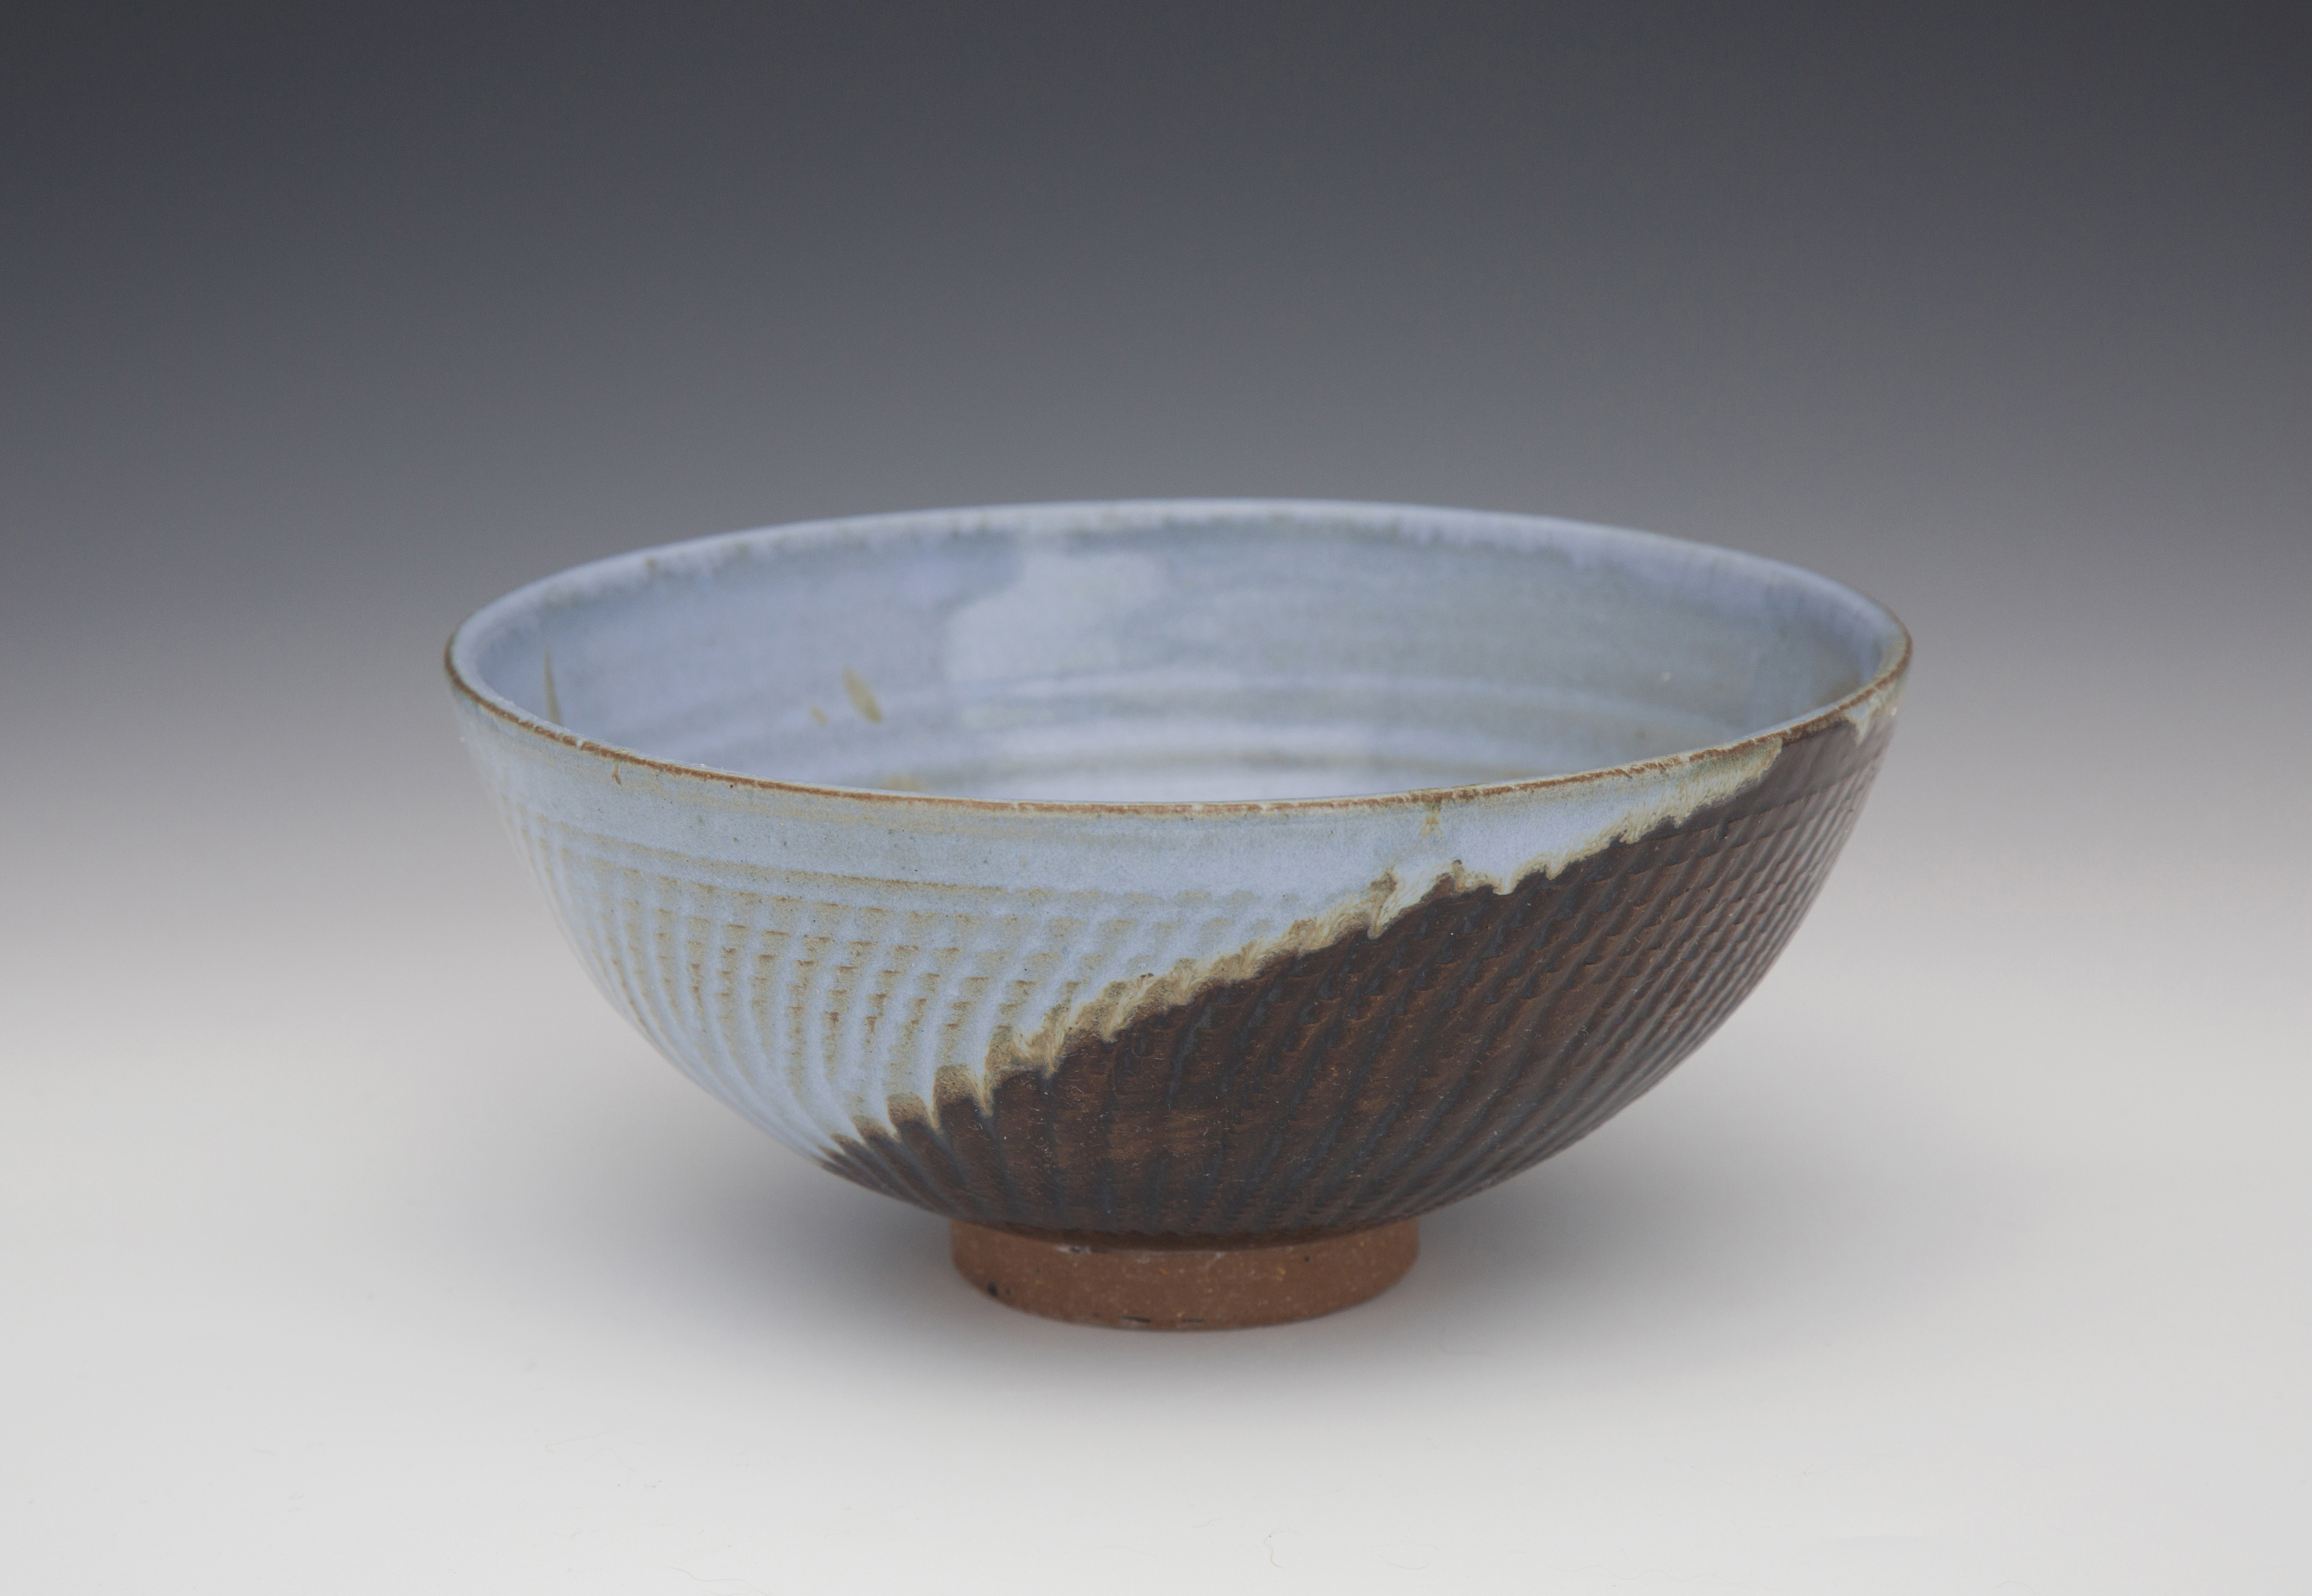 A bowl made from clay that is half light blue and half brown. It has a wooden circle as the bottom